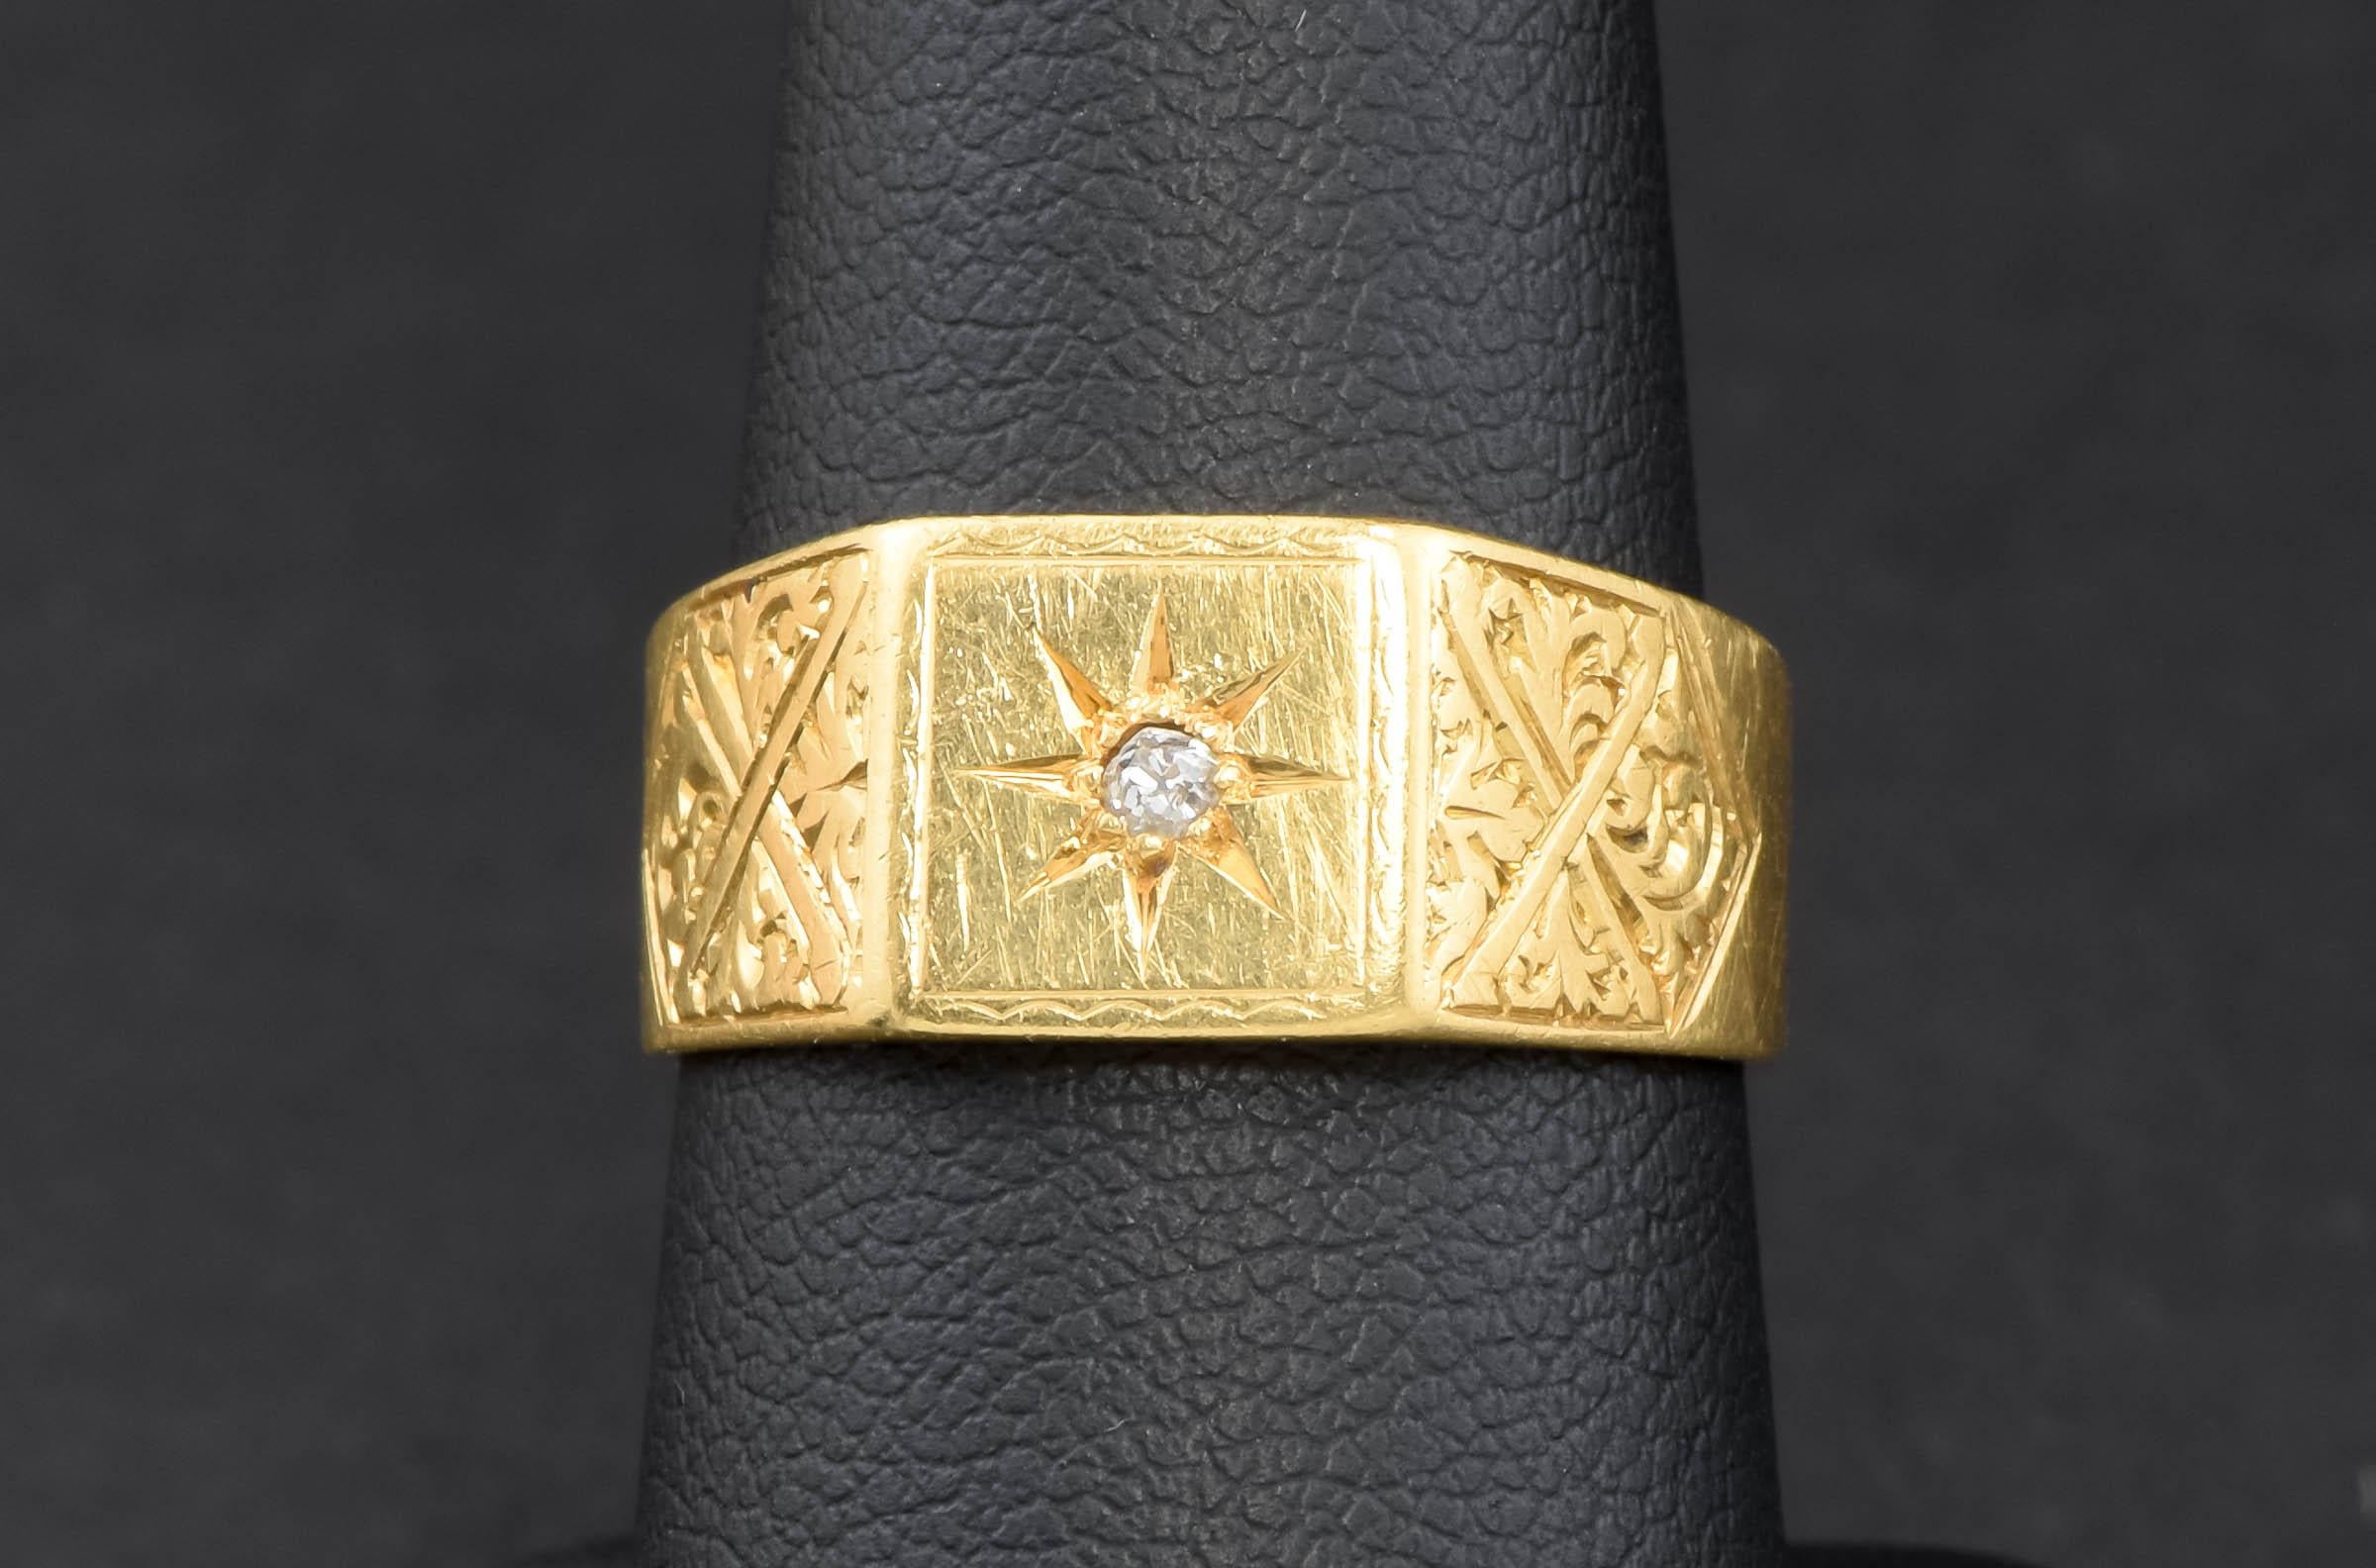 This beautiful, vintage - nearly antique - diamond star band combines three of my favorite jewelry elements: 18K gold, antique diamonds and hand engraving.

Crafted of solid 18K gold with a beautiful, rich color, the ring features a twinkling old